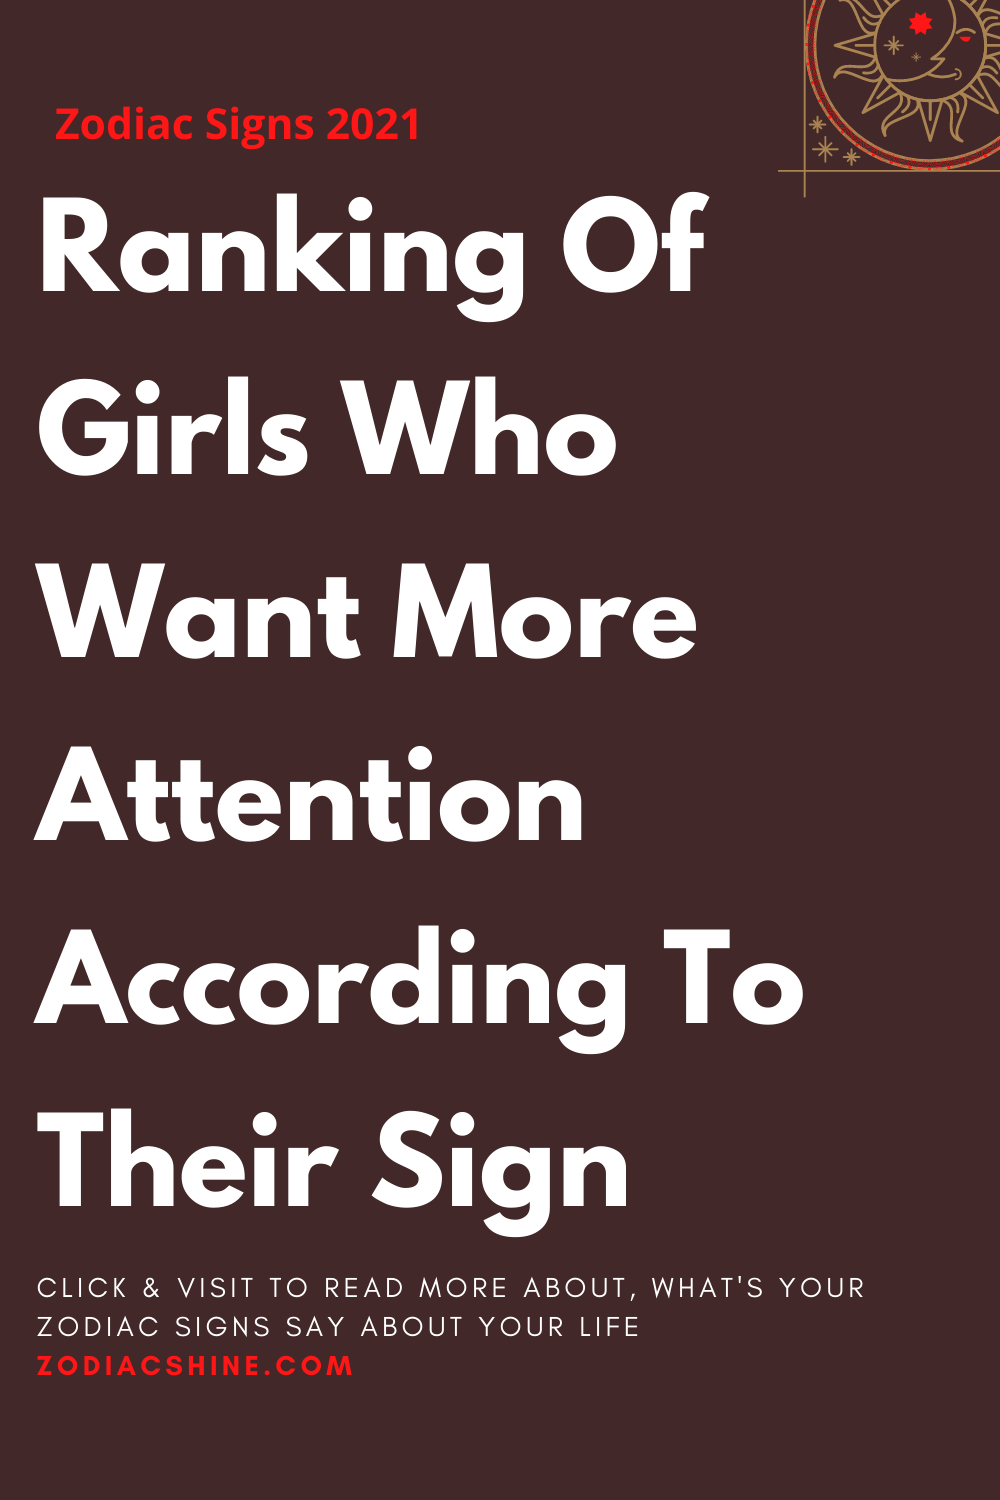 Ranking Of Girls Who Want More Attention According To Their Sign